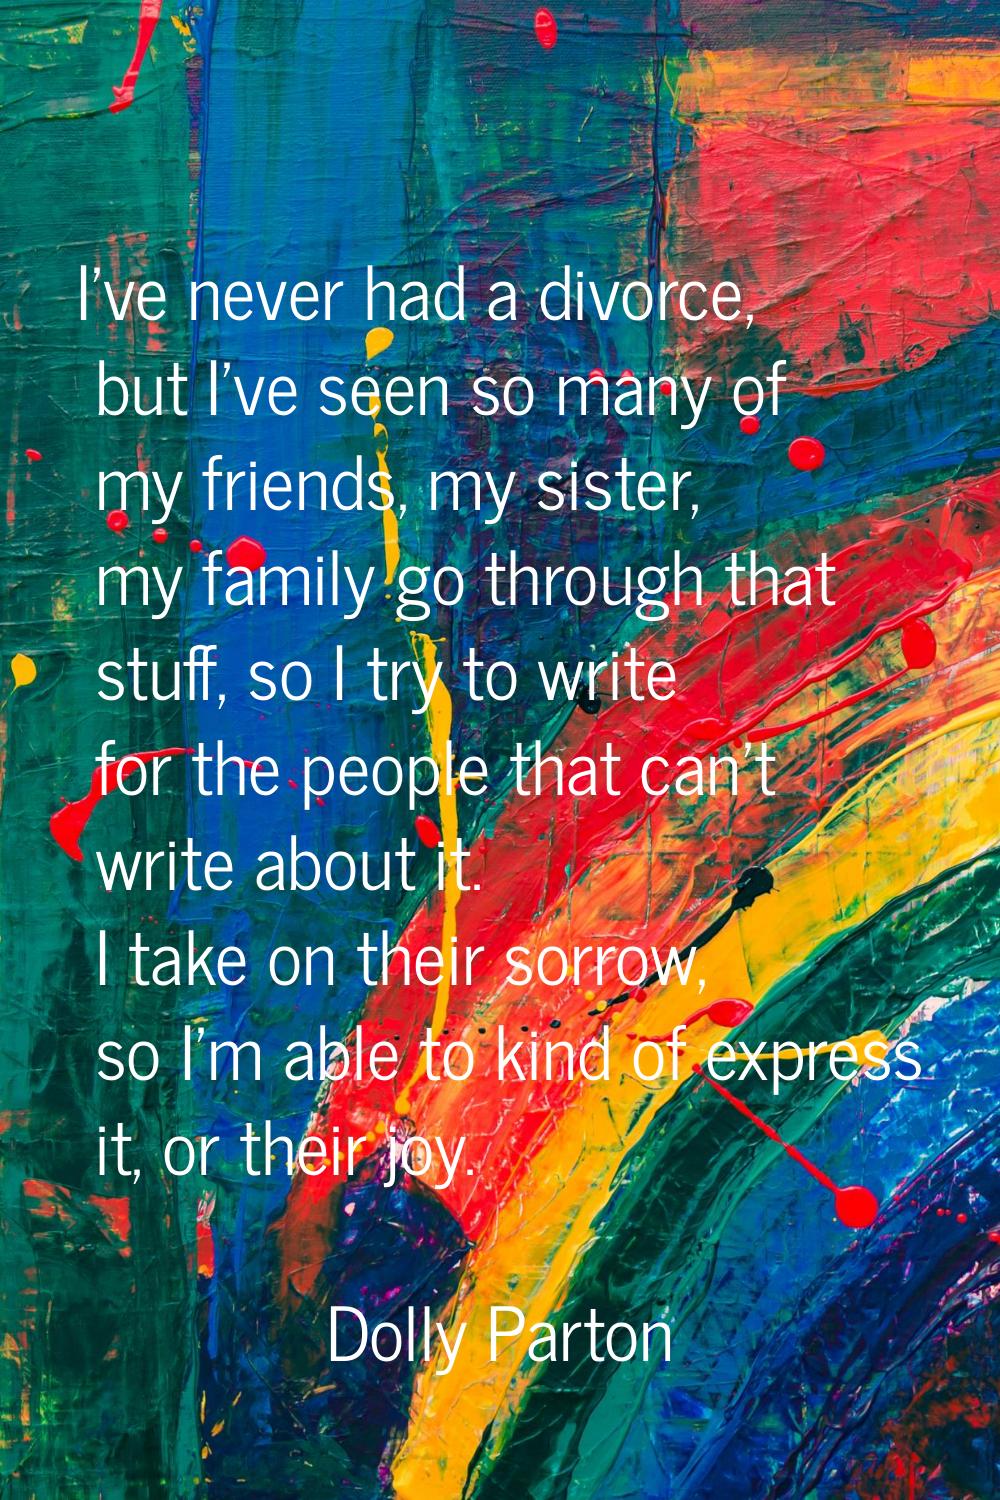 I've never had a divorce, but I've seen so many of my friends, my sister, my family go through that